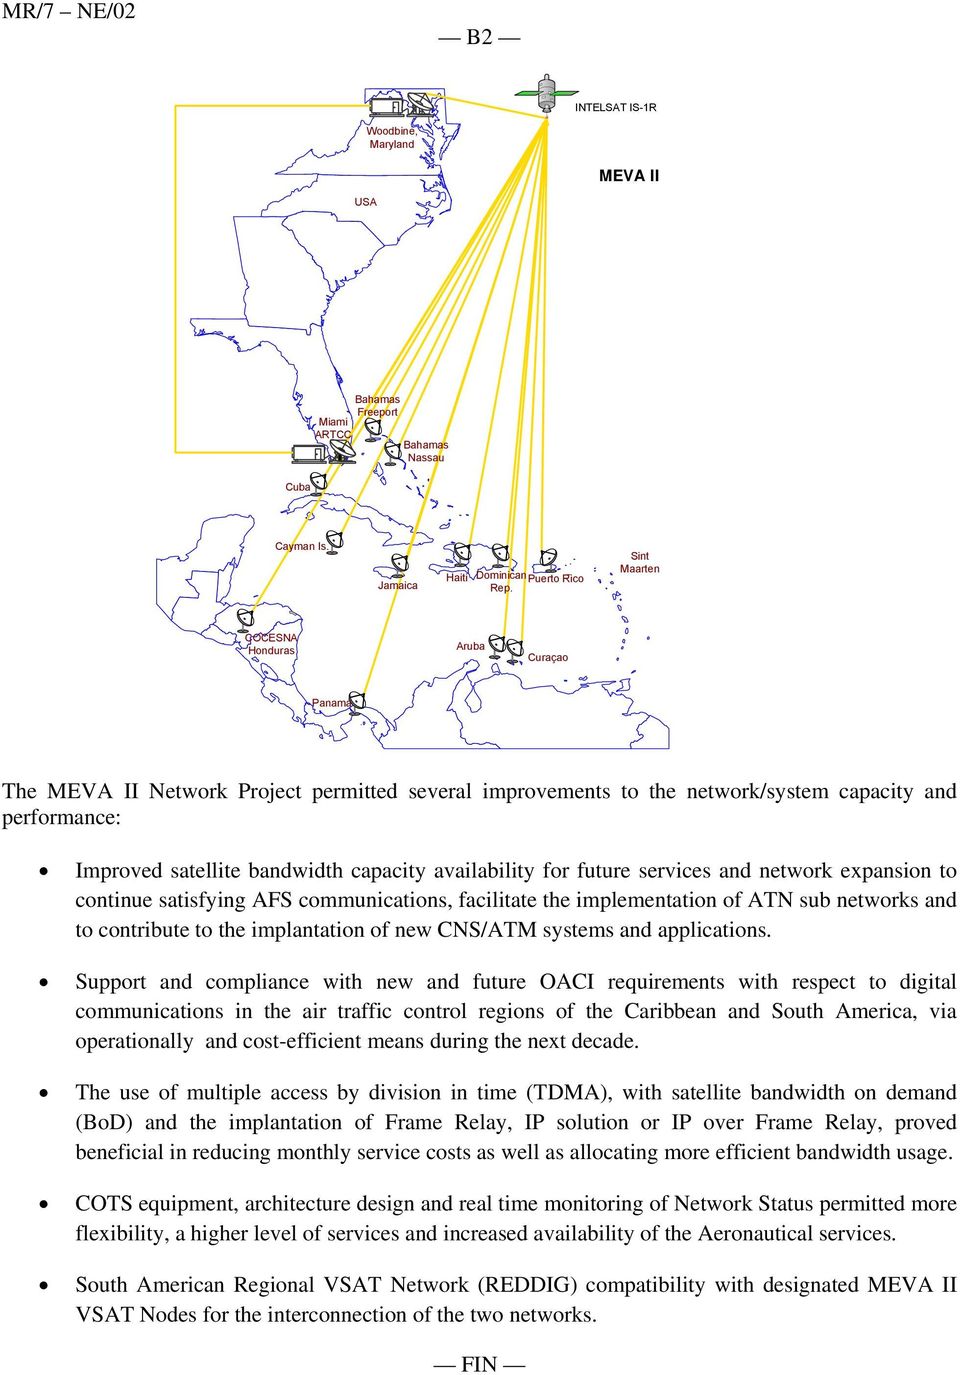 availability for future services and network expansion to continue satisfying AFS communications, facilitate the implementation of ATN sub networks and to contribute to the implantation of new